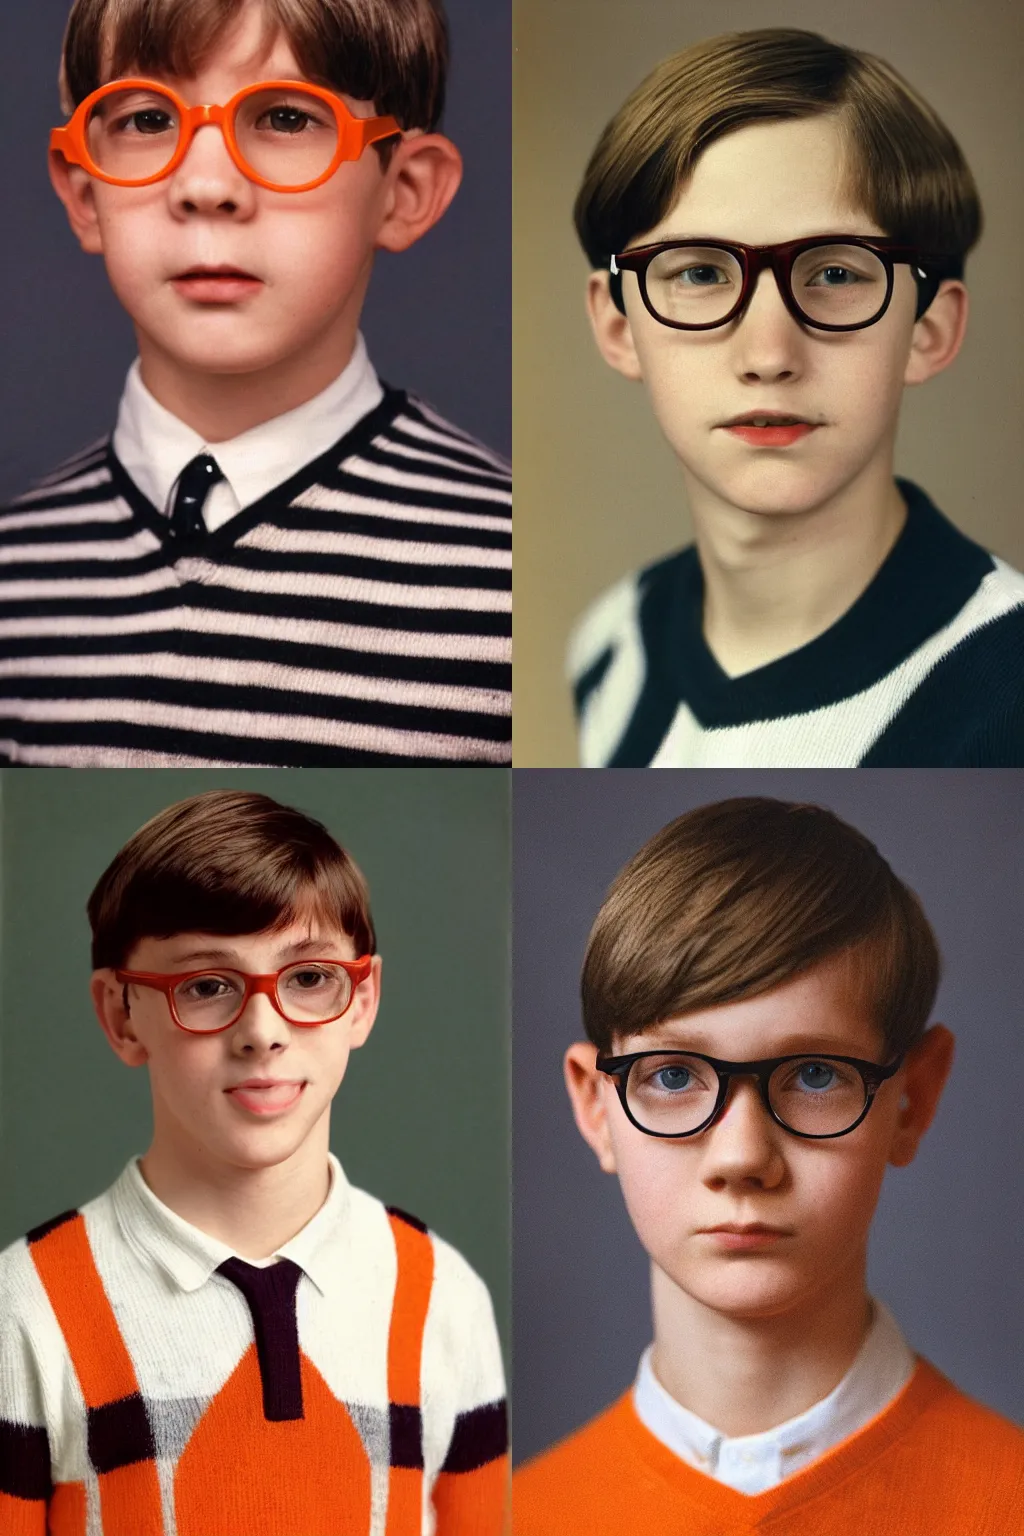 Prompt: a grammar school boy student with glasses, a combover, wearing a white shirt underneath a dark orange striped v-neck jumper, color portrait photography,